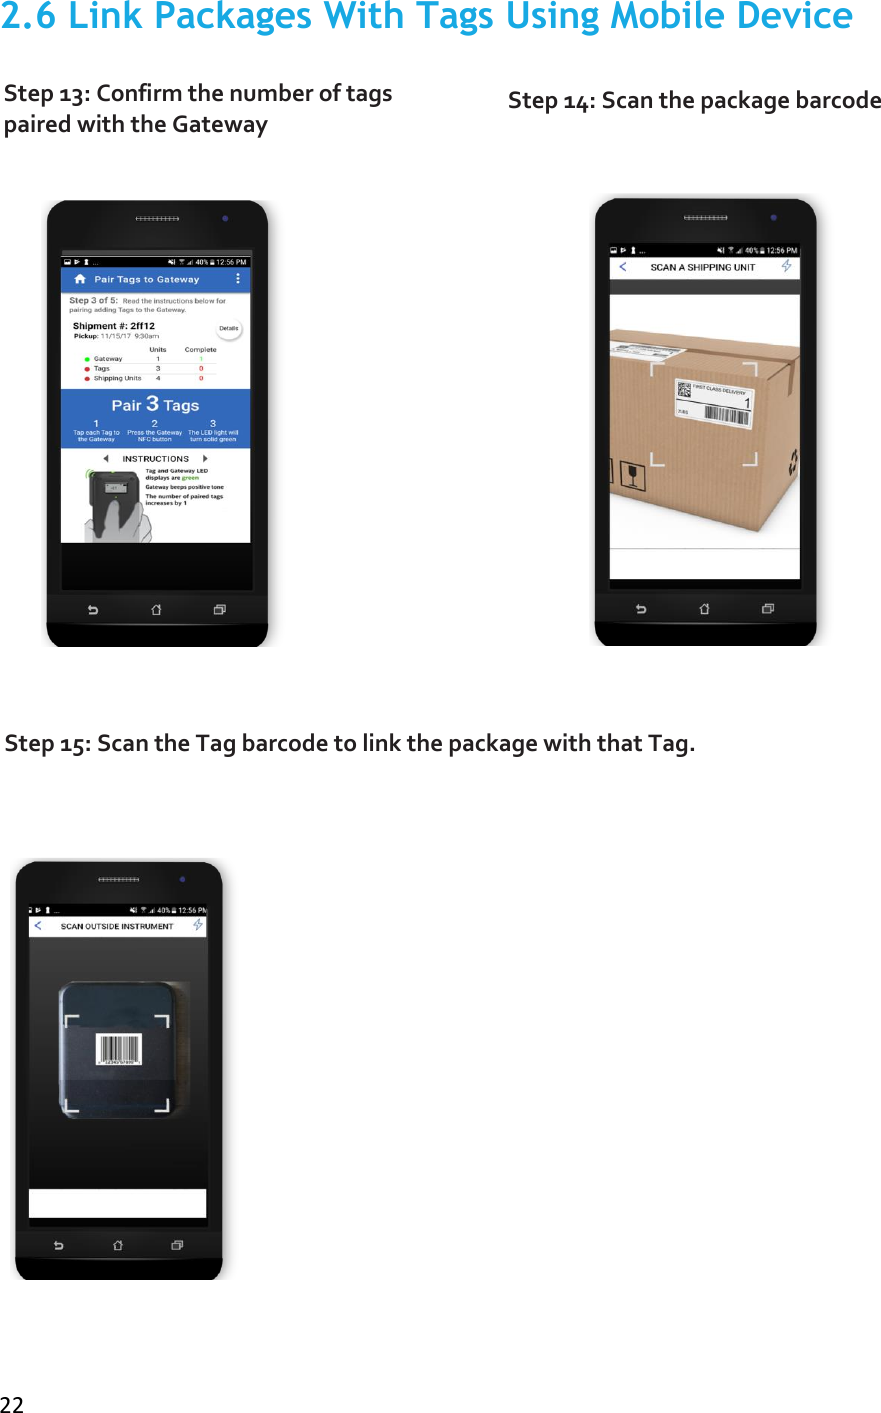  22 2.6 Link Packages With Tags Using Mobile Device                       Step 13: Confirm the number of tags paired with the Gateway Step 14: Scan the package barcode Step 15: Scan the Tag barcode to link the package with that Tag.  